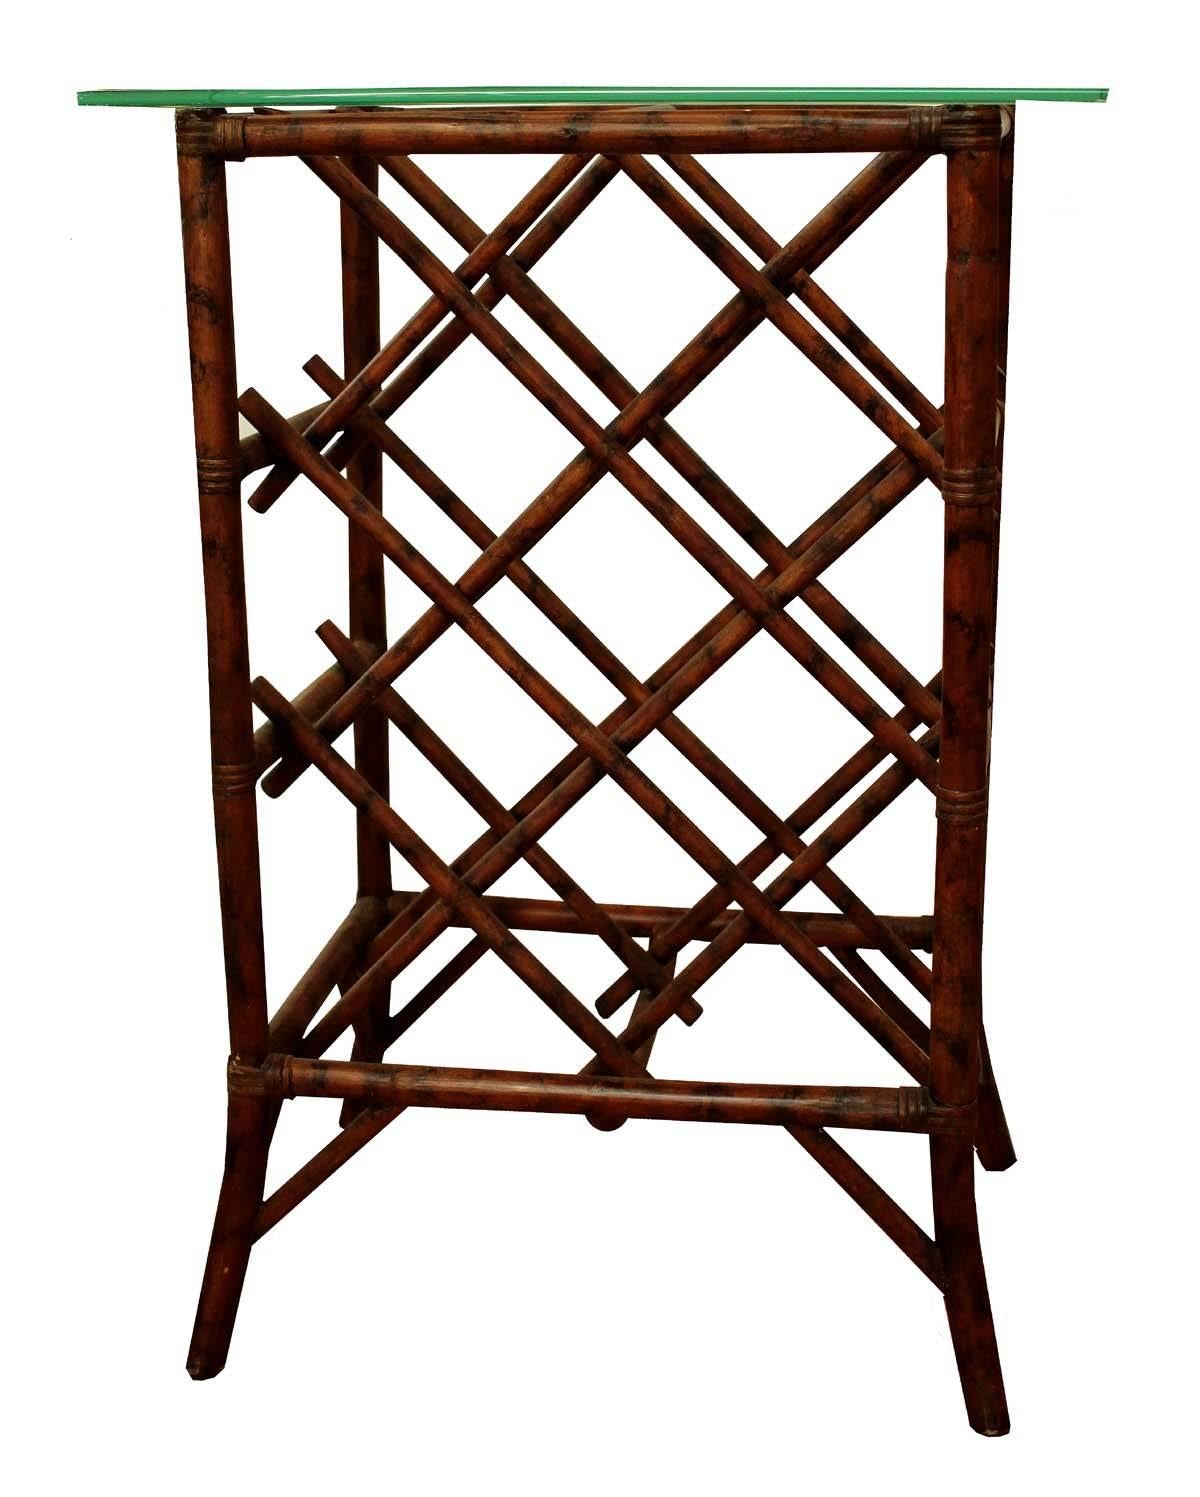 Antique glass bamboo wine rack. This piece is in excellent condition with a wonderful original patina. Strong enough to handle a full load of your favorite wines.